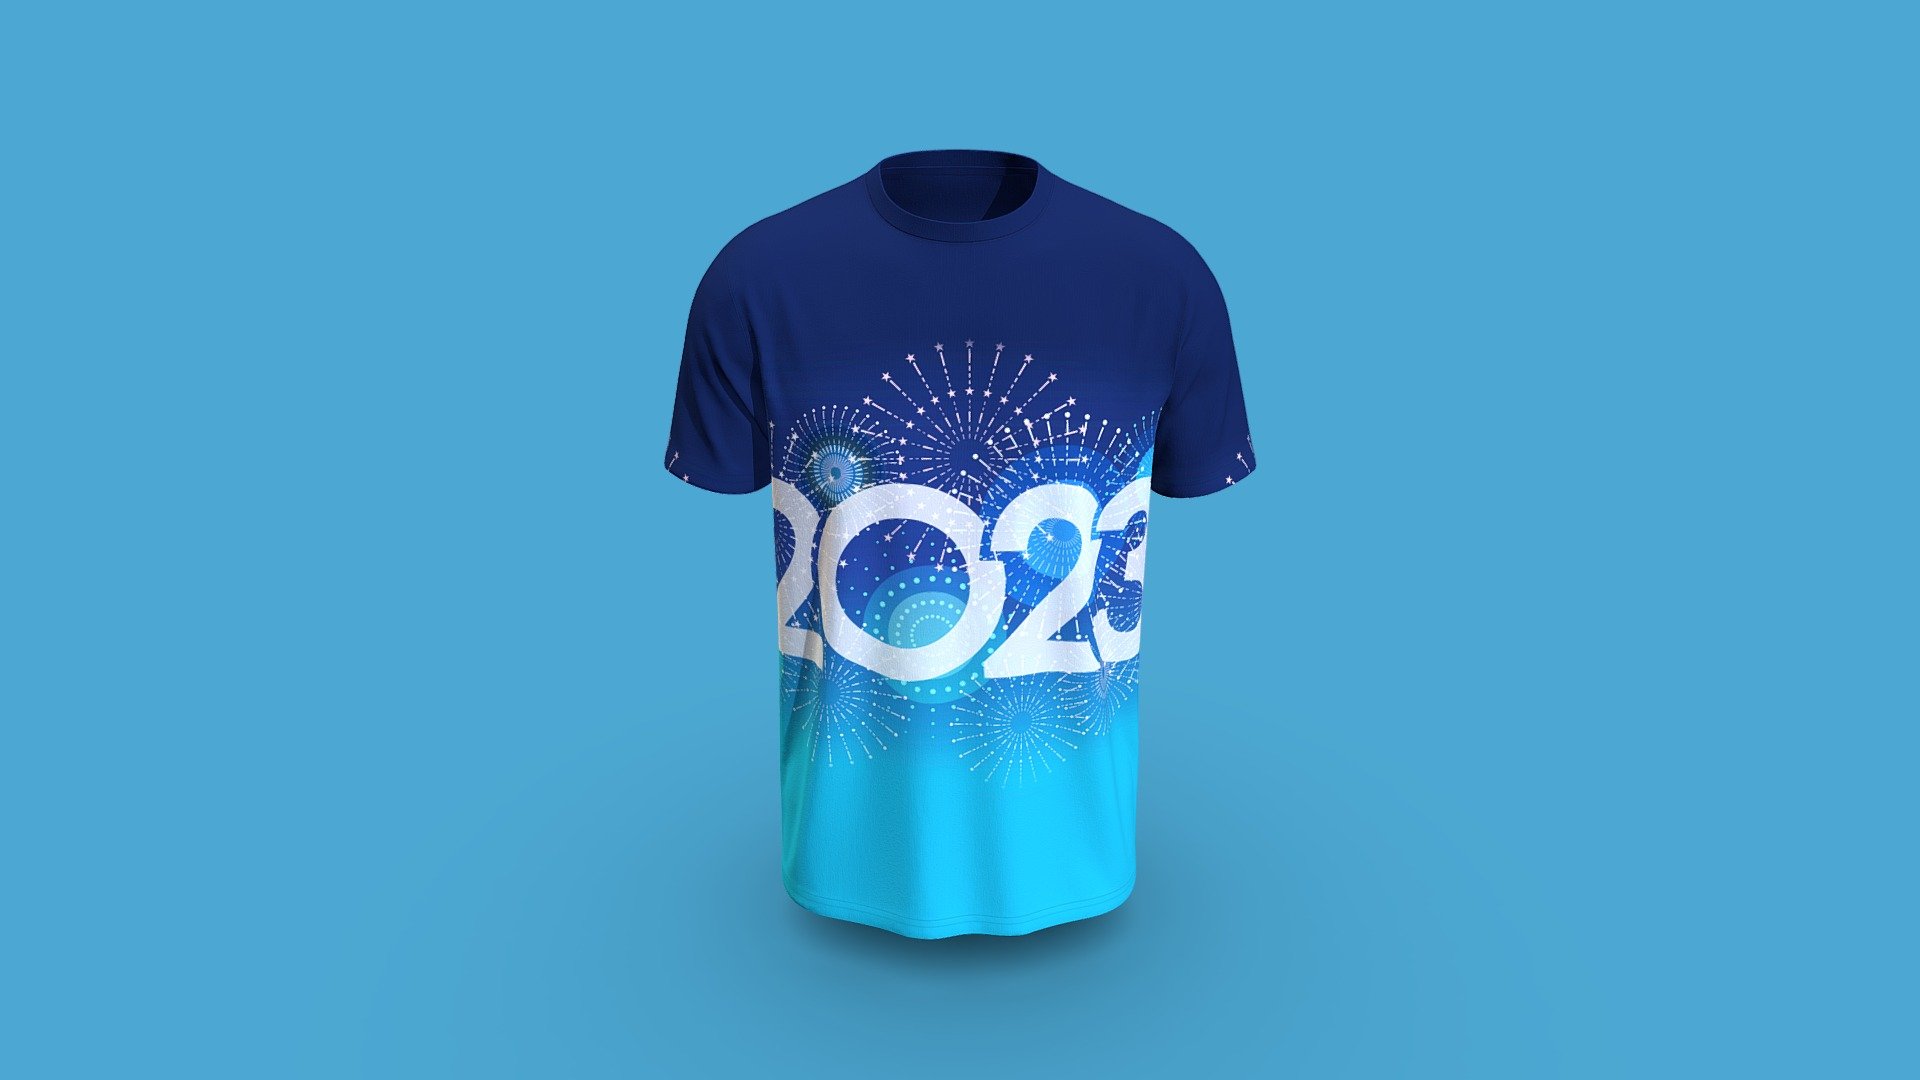 Cloth Title = Round Neck Happy New Year 2023 T-Shirts  

SKU = DG100132 

Category = Unisex 

Product Type = Tee 

Cloth Length = Regular 

Body Fit = Regular Fit 

Occasion = Casual  

Sleeve Style = Set In Sleeve 


Our Services:

3D Apparel Design.

OBJ,FBX,GLTF Making with High/Low Poly.

Fabric Digitalization.

Mockup making.

3D Teck Pack.

Pattern Making.

2D Illustration.

Cloth Animation and 360 Spin Video.


Contact us:- 

Email: info@digitalfashionwear.com 

Website: https://digitalfashionwear.com 


We designed all the types of cloth specially focused on product visualization, e-commerce, fitting, and production. 

We will design: 

T-shirts 

Polo shirts 

Hoodies 

Sweatshirt 

Jackets 

Shirts 

TankTops 

Trousers 

Bras 

Underwear 

Blazer 

Aprons 

Leggings 

and All Fashion items. 





Our goal is to make sure what we provide you, meets your demand 3d model